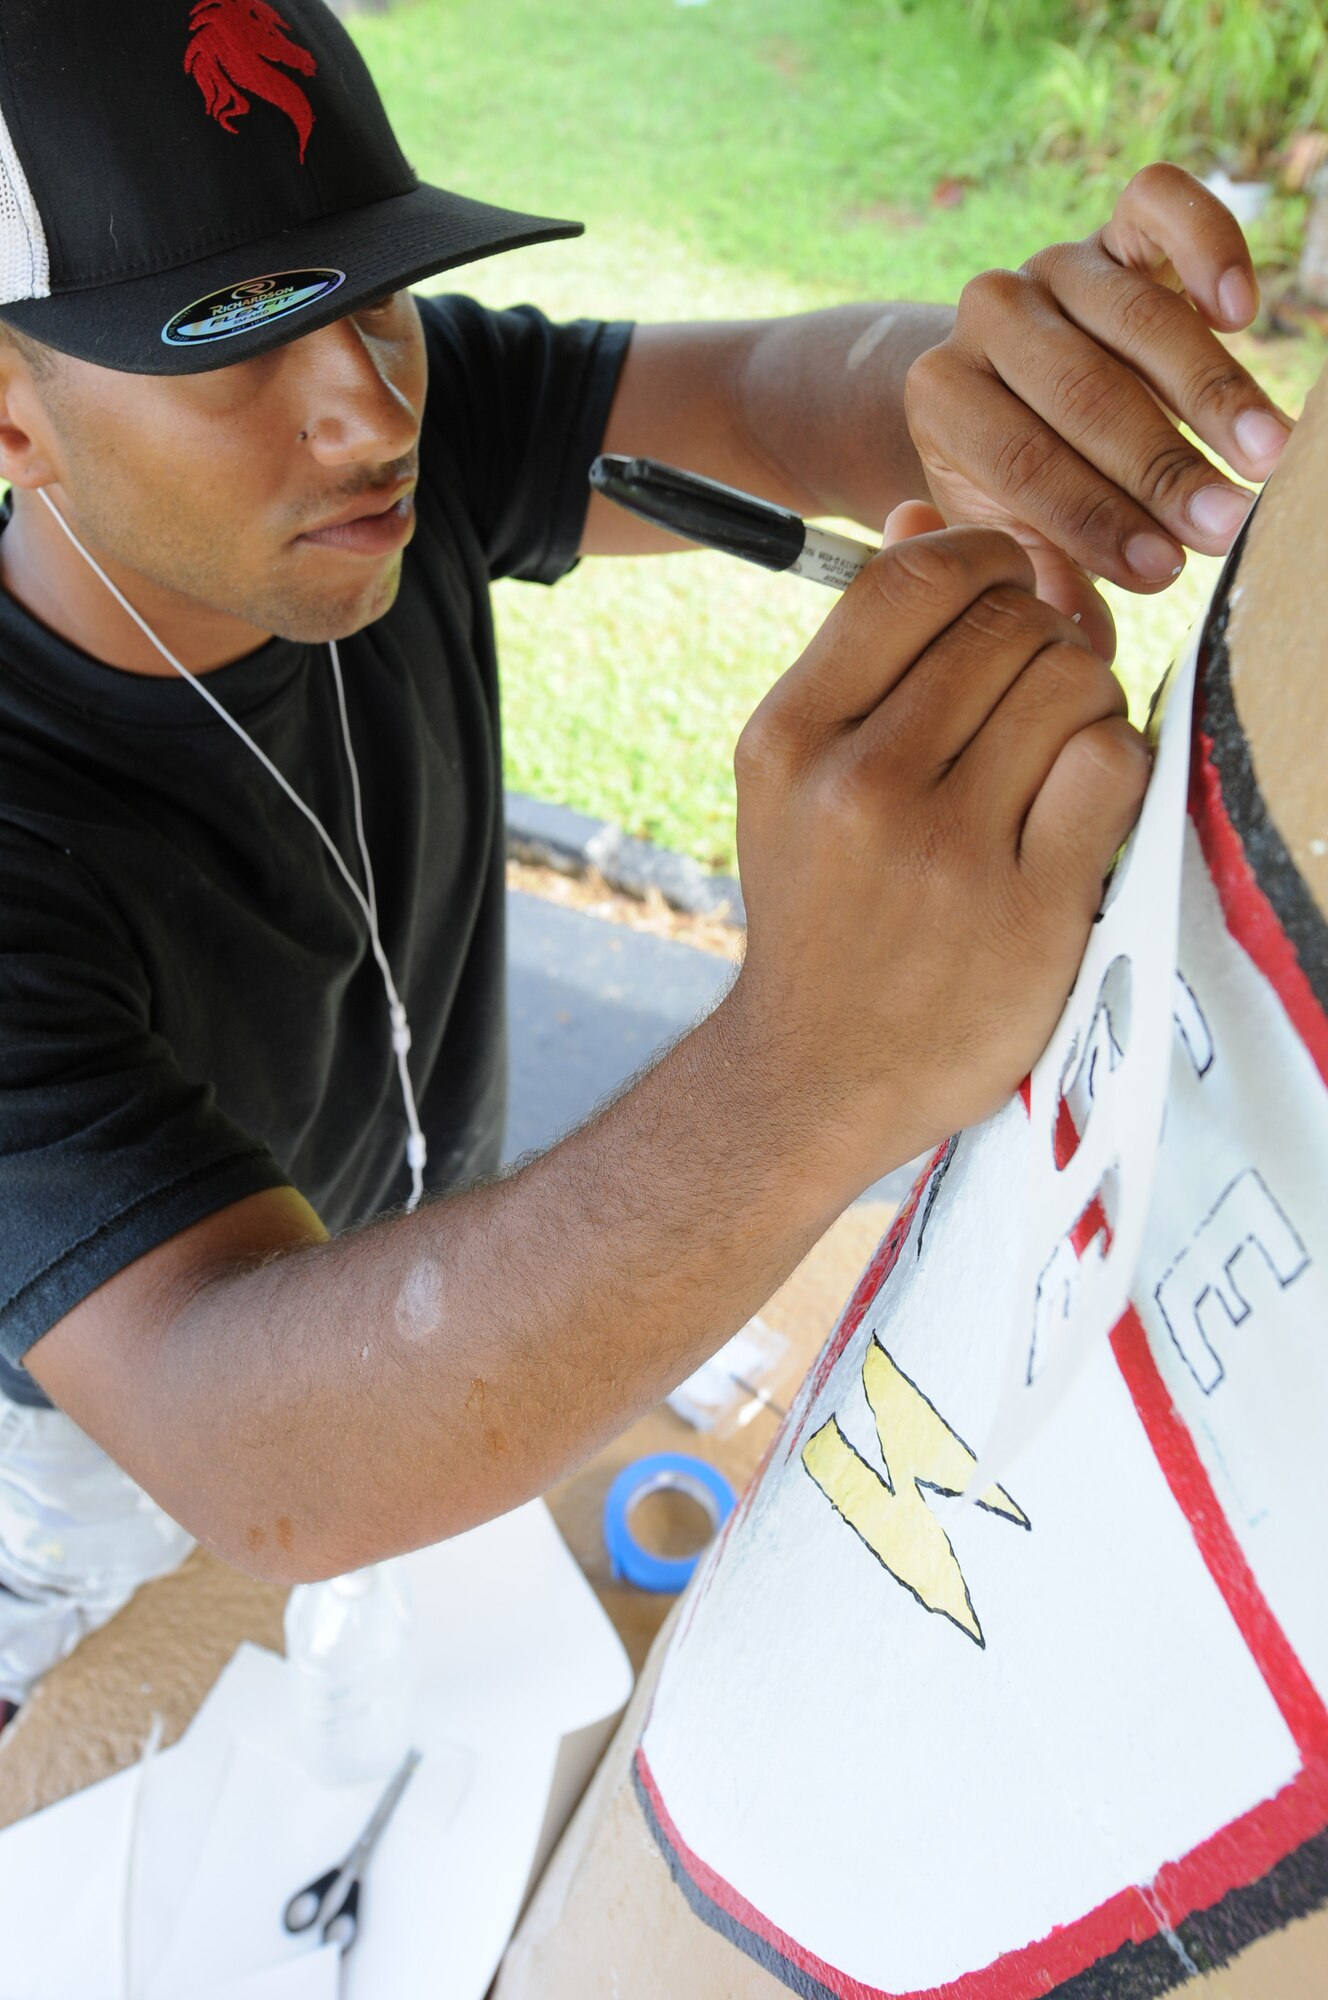 ANDERSEN AIR FORCE BASE, Guam - Staff Sgt. Cameron Pleasant, 554th RED
HORSE Squadron structures shop, outlines a stencil saying "RED HORSE" on the
bus stop they adopted in Yigo, Guam, April 7. Through community relations,
groups and units here may adopt a local bus stop to paint with their own
designs and help clean up the local community. (U.S. Air Force photo /
Senior Airman Carlin Leslie)
